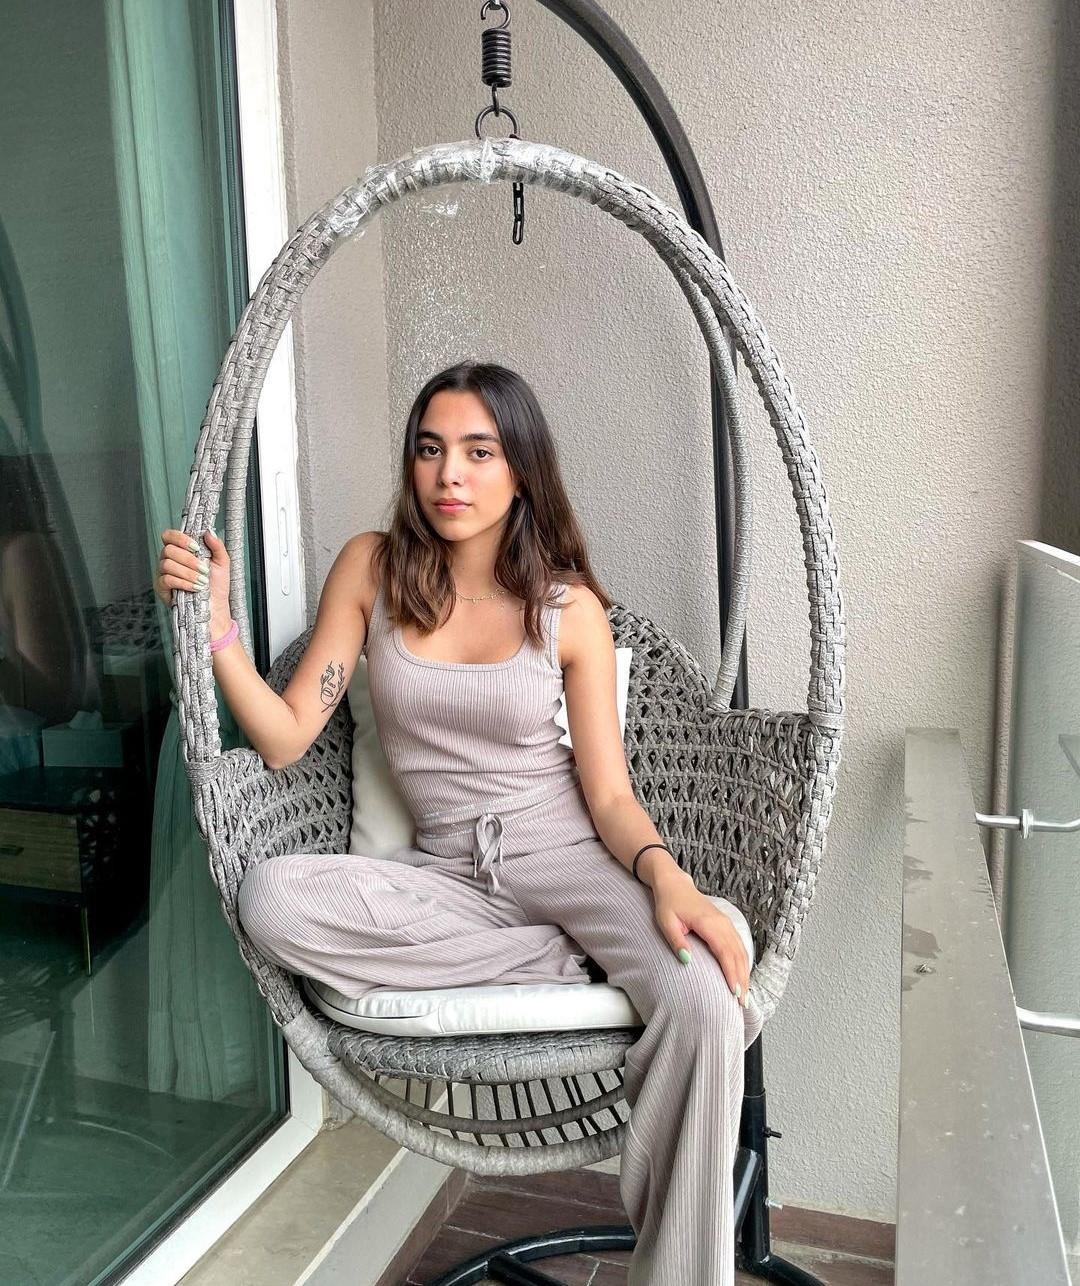 ‘Prioritise yourself’: Aaliyah Kashyap reveals being in a toxic relationship